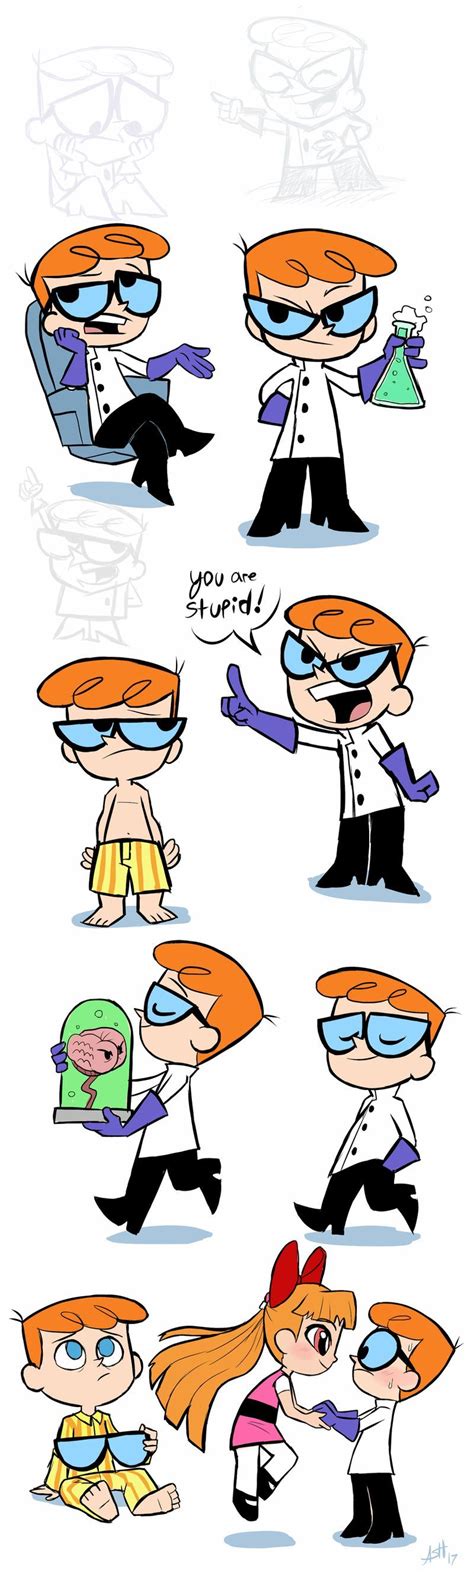 My Style Dexter By Skeleion On Deviantart Old Cartoon Shows Cartoon As